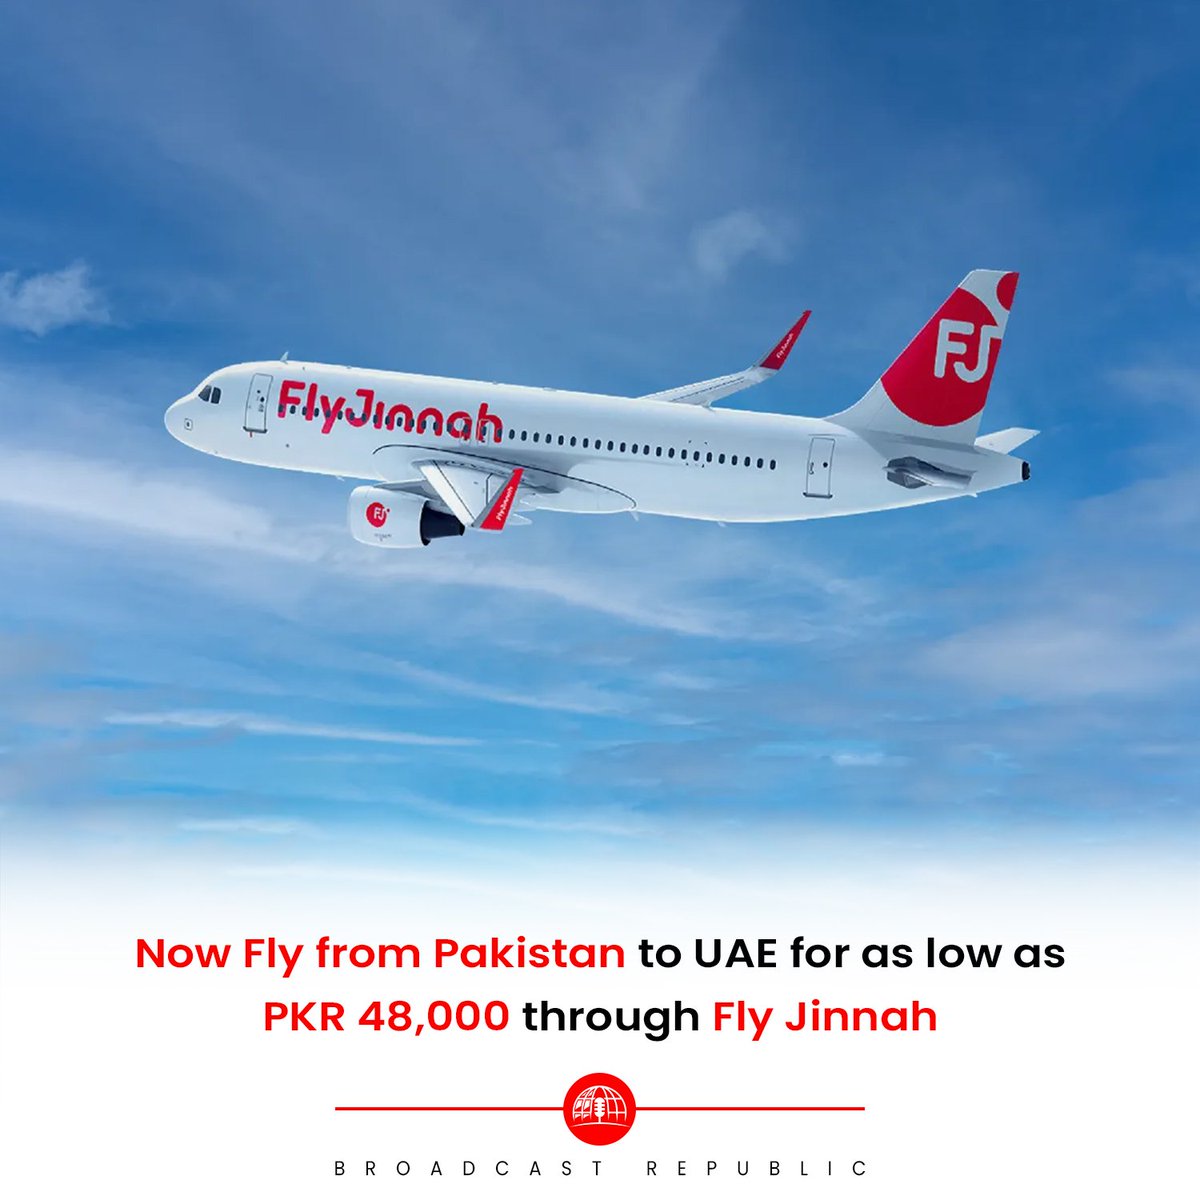 Fly Jinnah takes flight to UAE! 🛫
Starting March 27, 2024, enjoy daily non-stop flights from Lahore to Sharjah for as low as PKR 48,000.  ✈️ 
#BroadcastRepublic #FlyJinnah #TravelToUAE #AffordableFlights #LahoreToSharjah